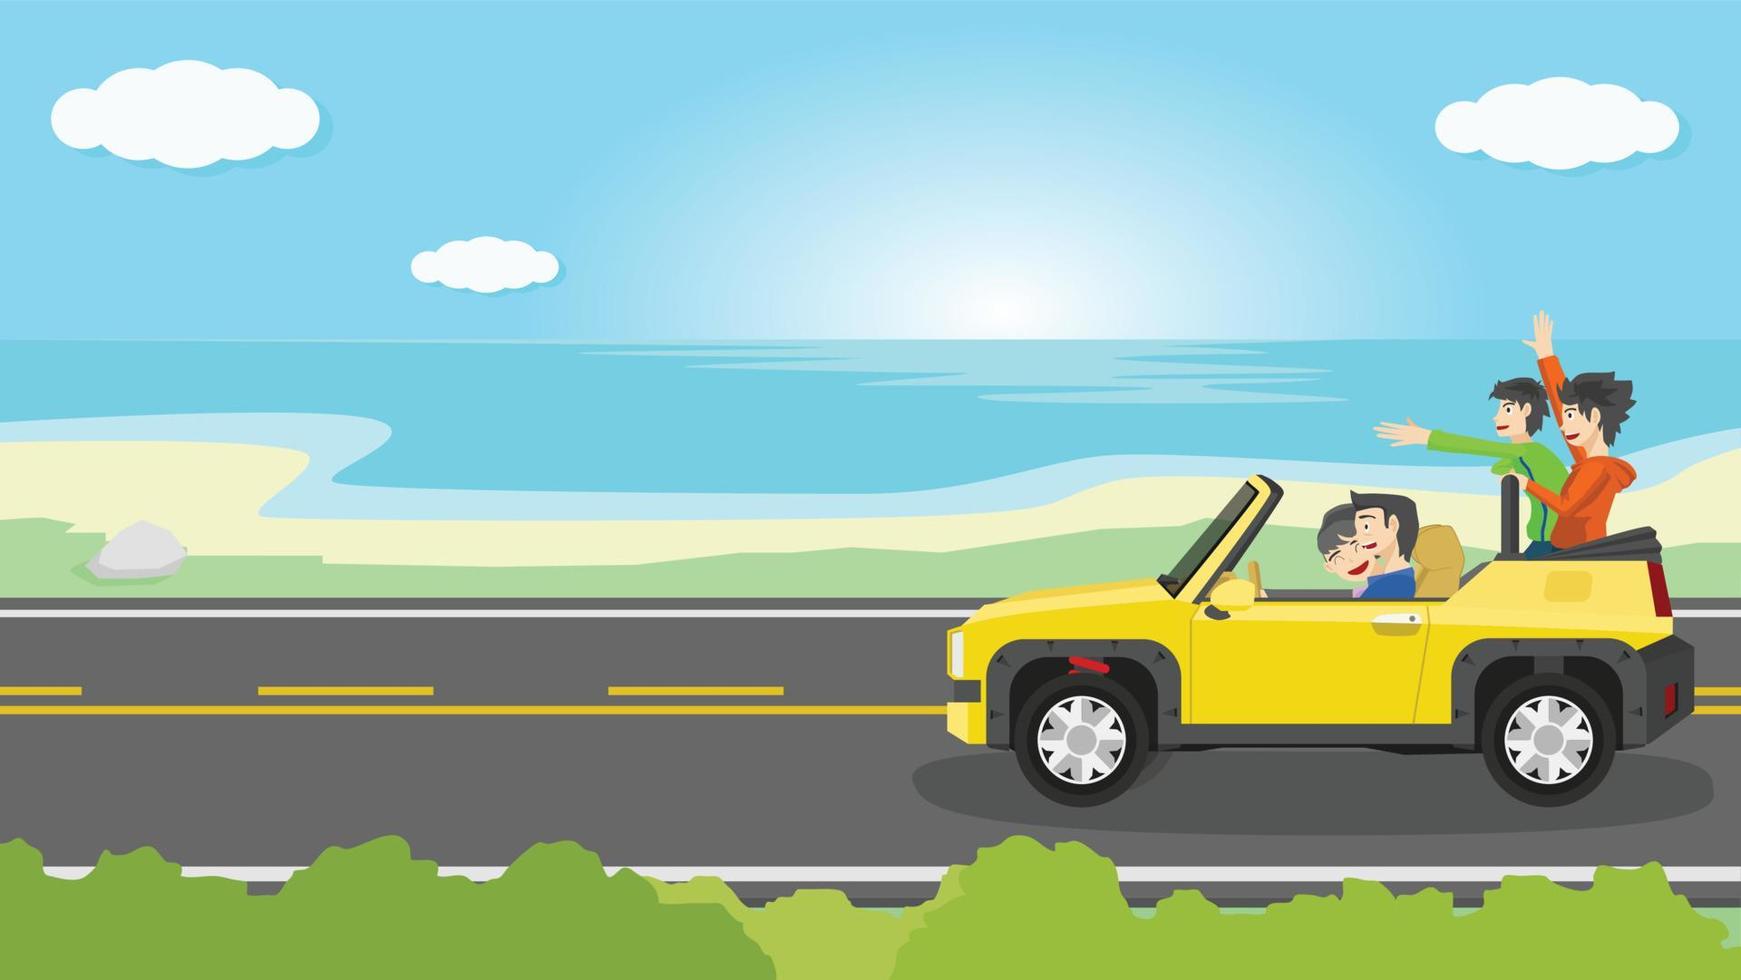 Driving car yellow color off road open roof on asphalt road. Family trip with parents sit in front while children sit in the back with happy hands. background of beach and vast sea under the blue sky. vector